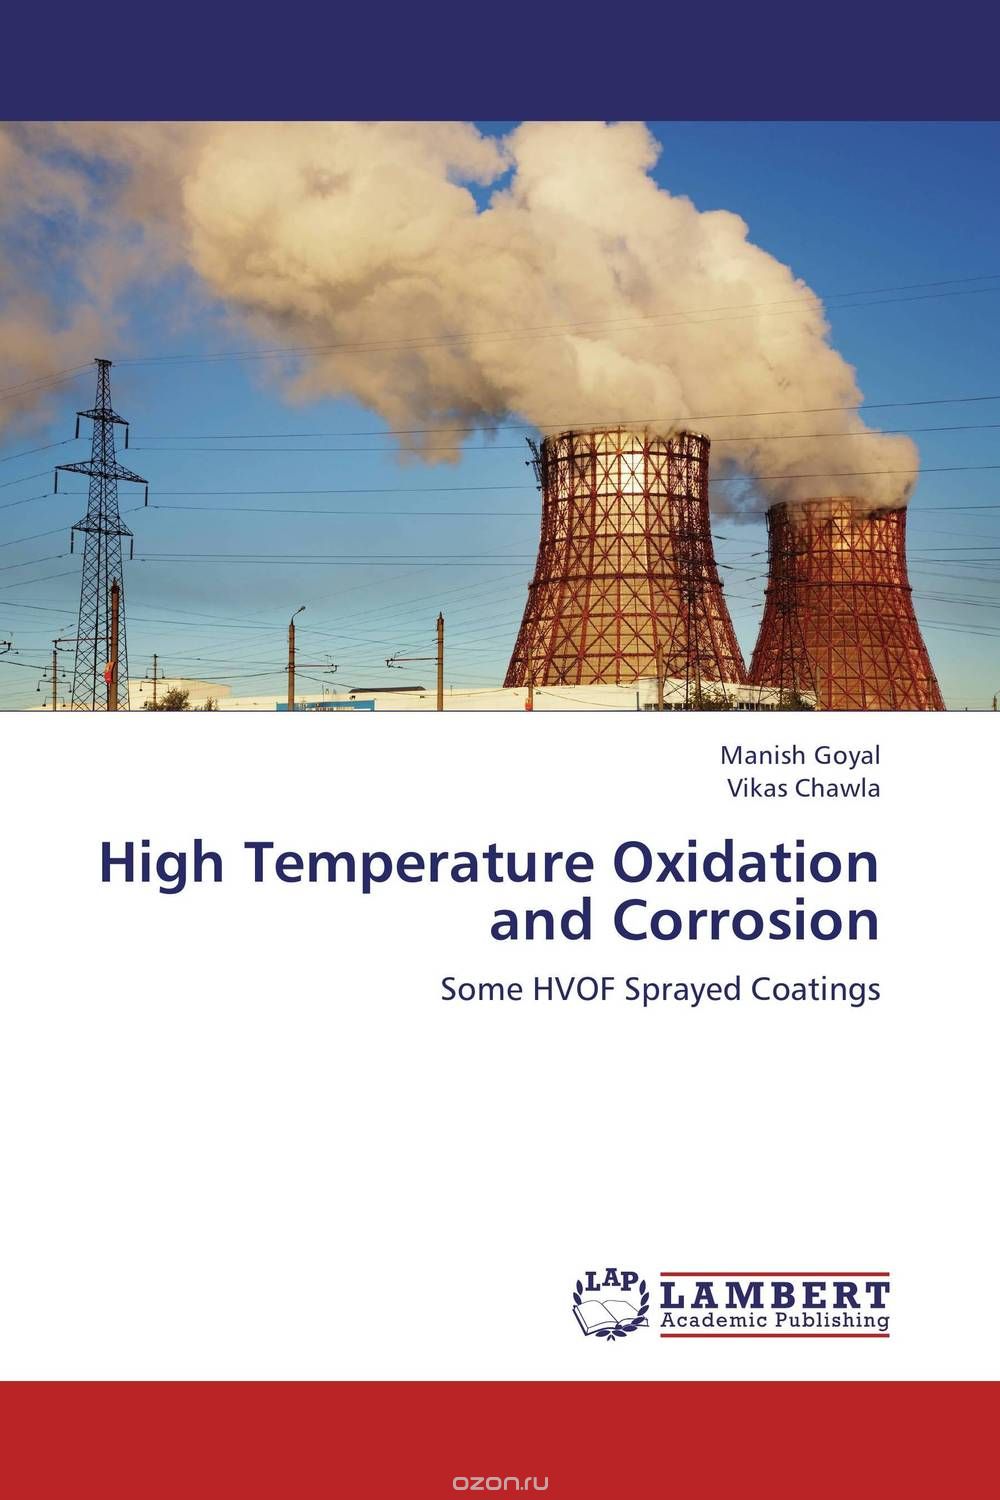 High Temperature Oxidation and Corrosion